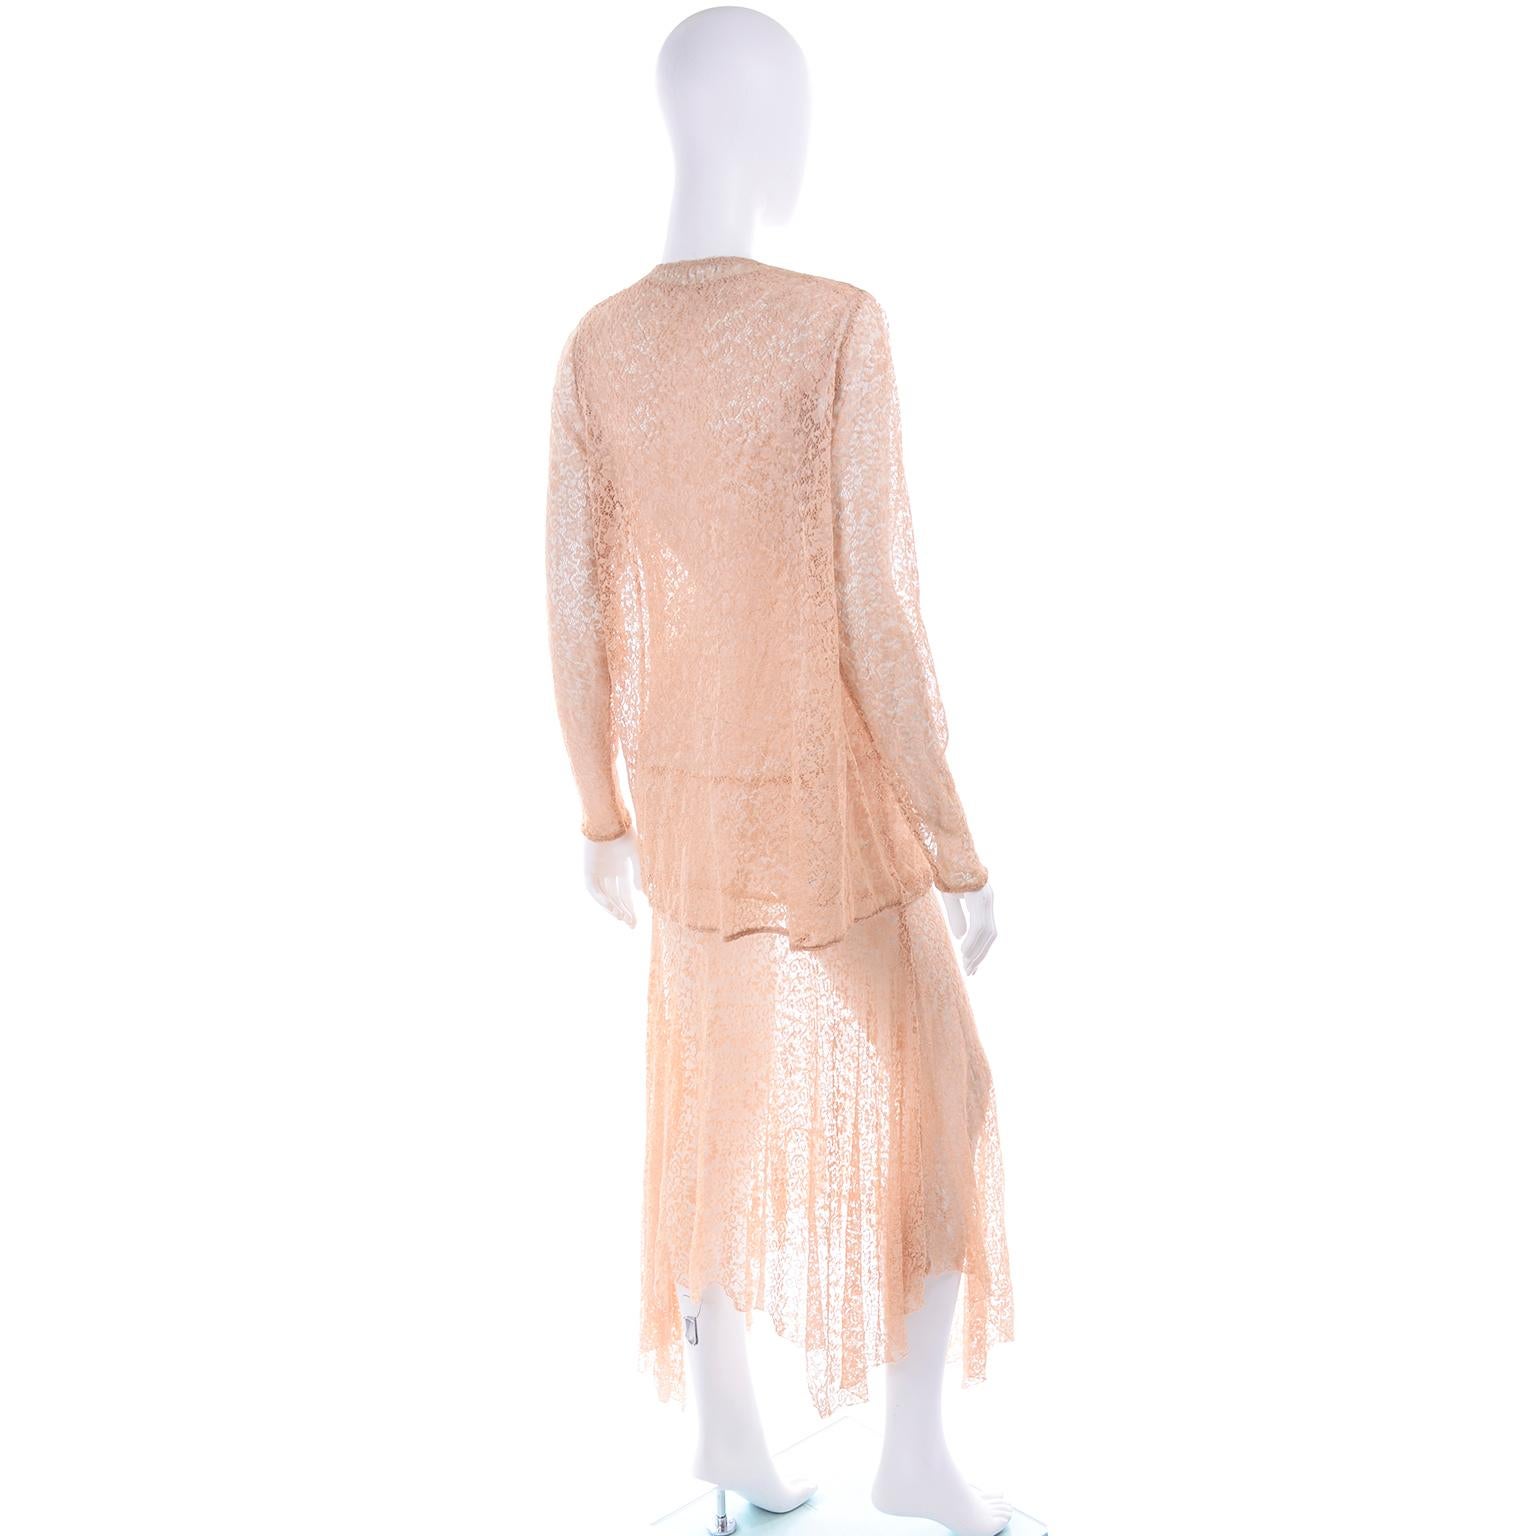 Women's 1930s Tan Peach Stretch Lace Dress With Bows and Matching Jacket